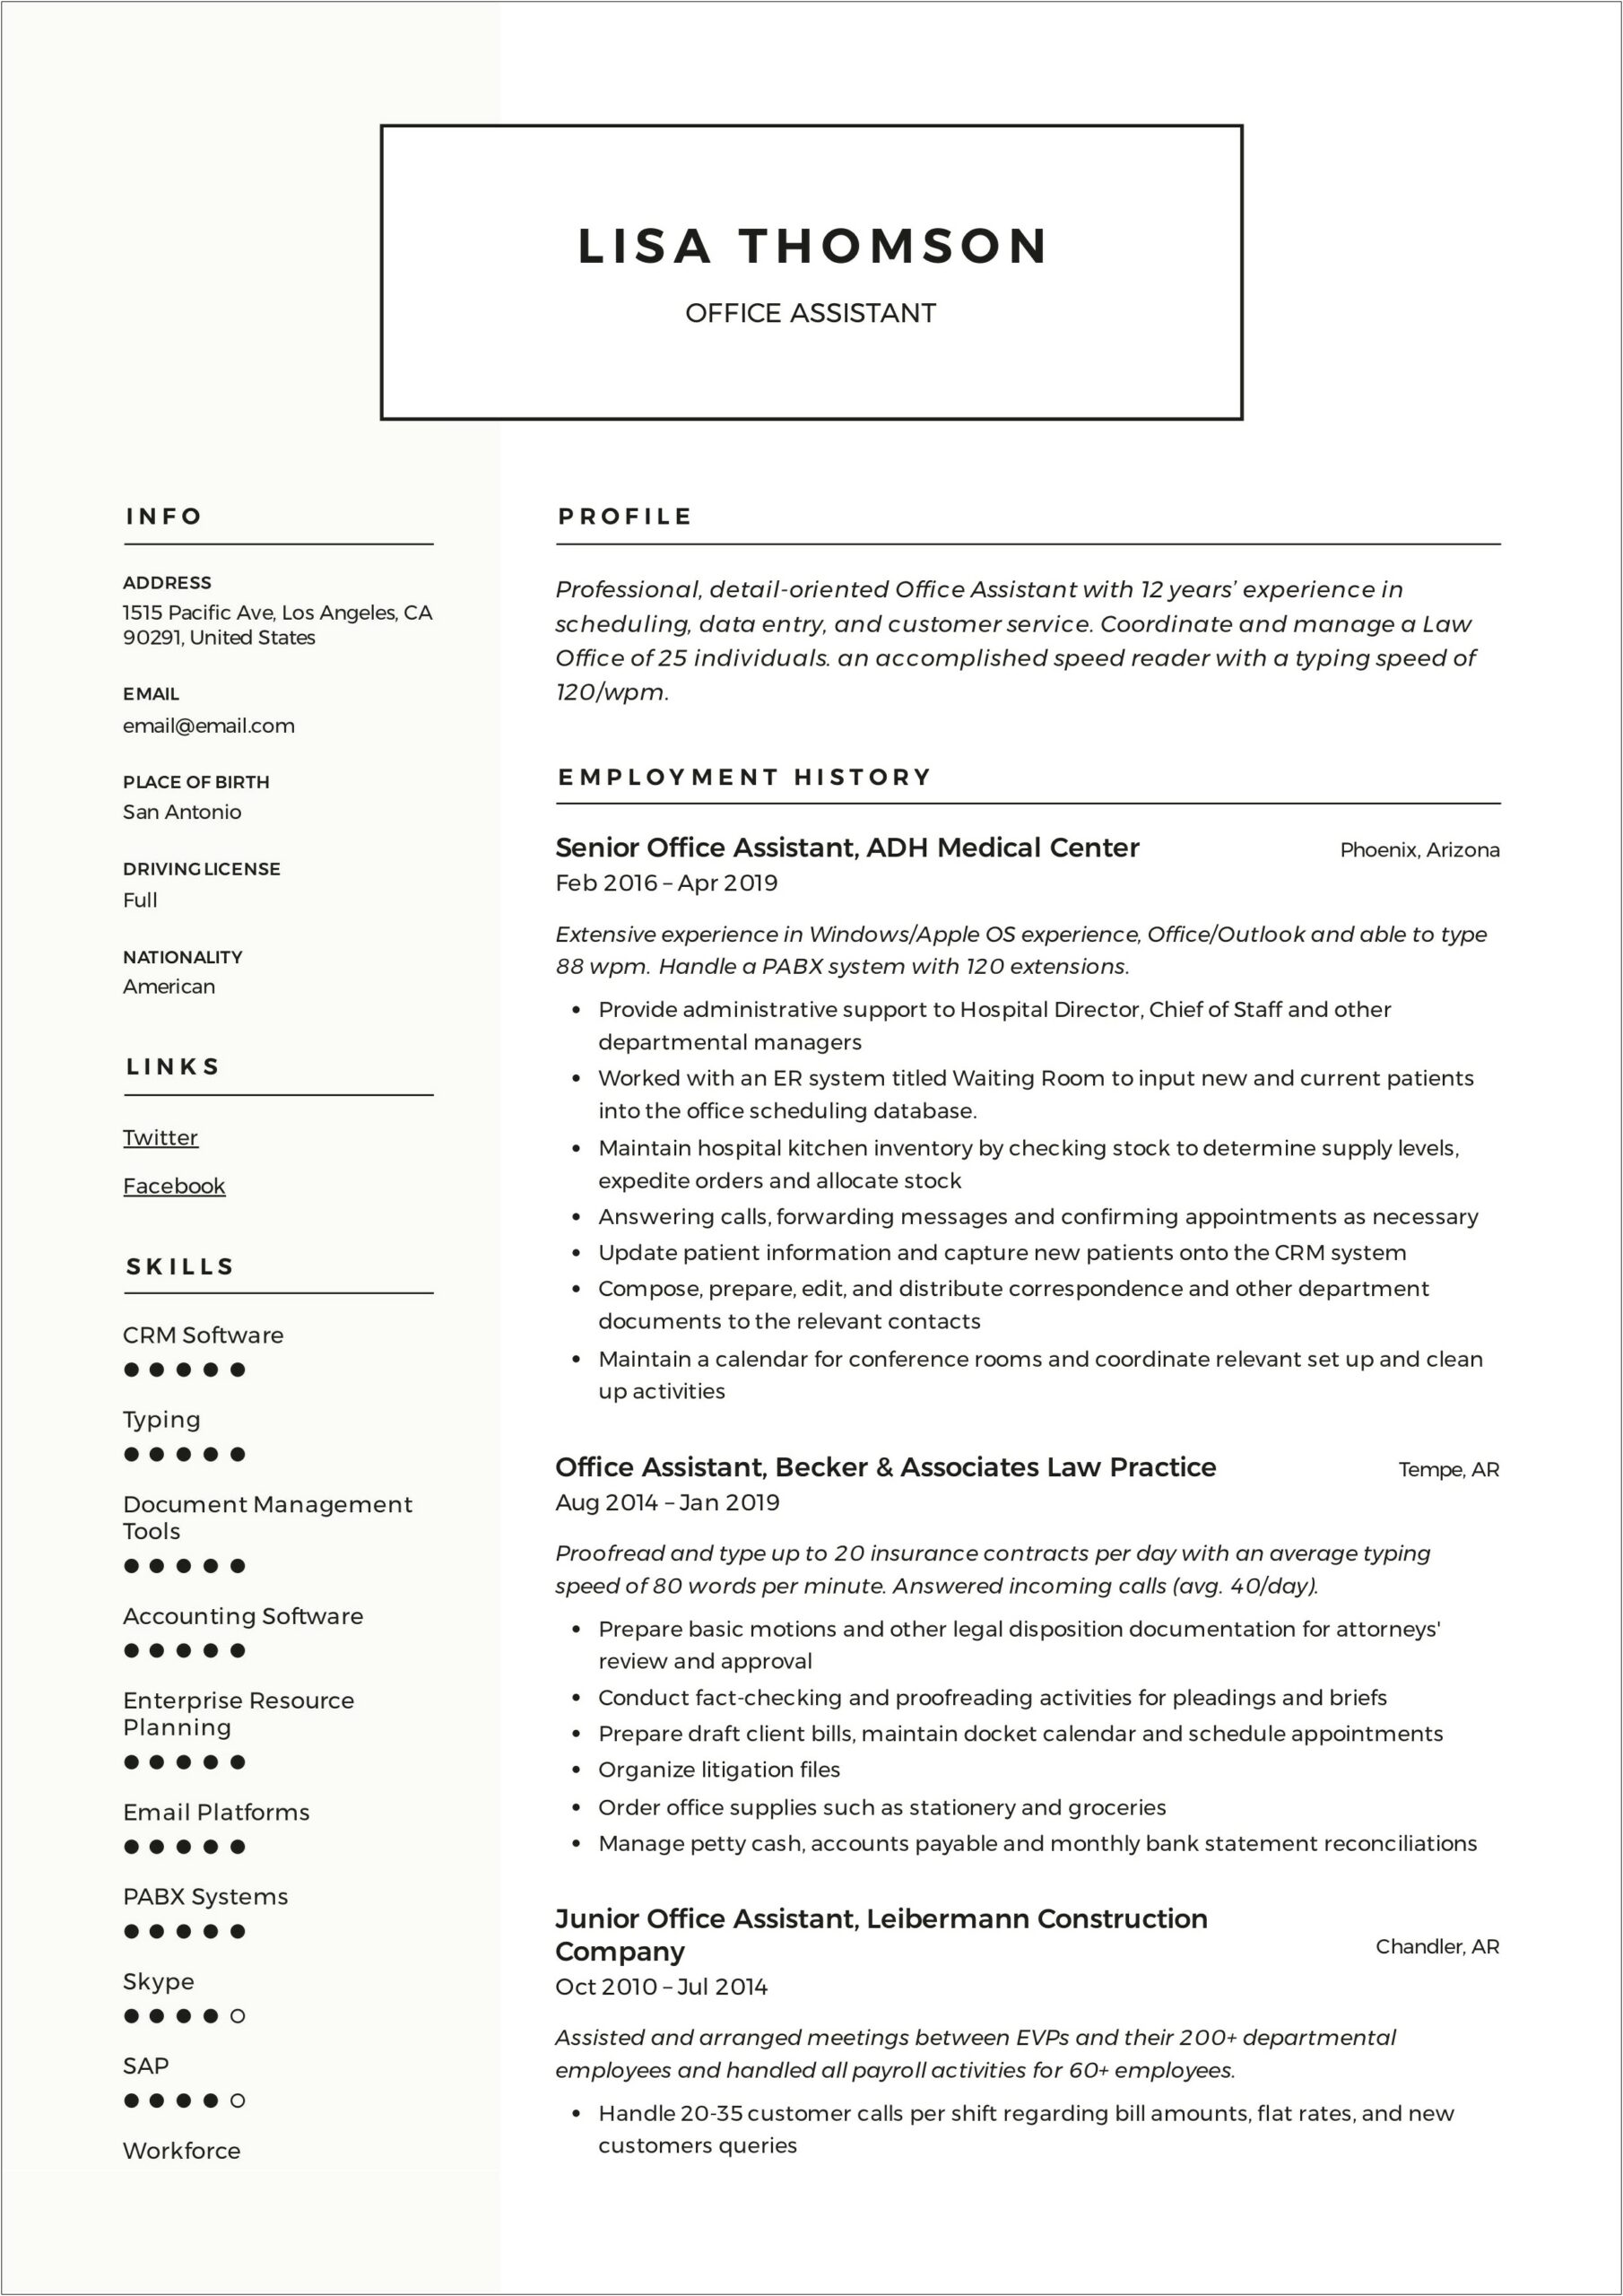 Construction Administrative Assistant Resume Objective